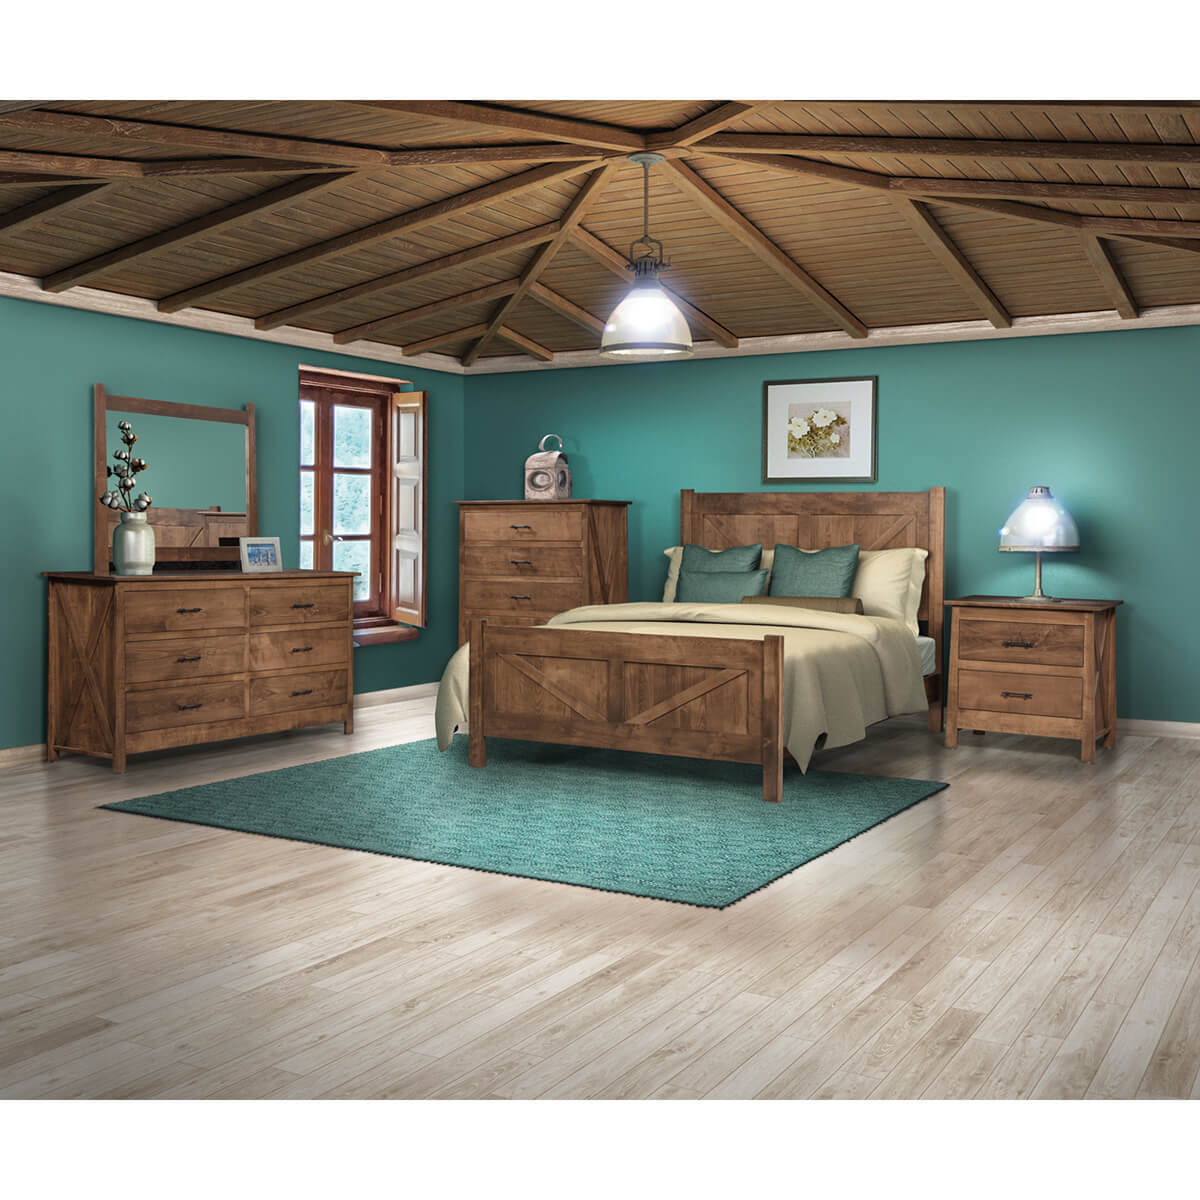 TribecaBedroomCollection160785